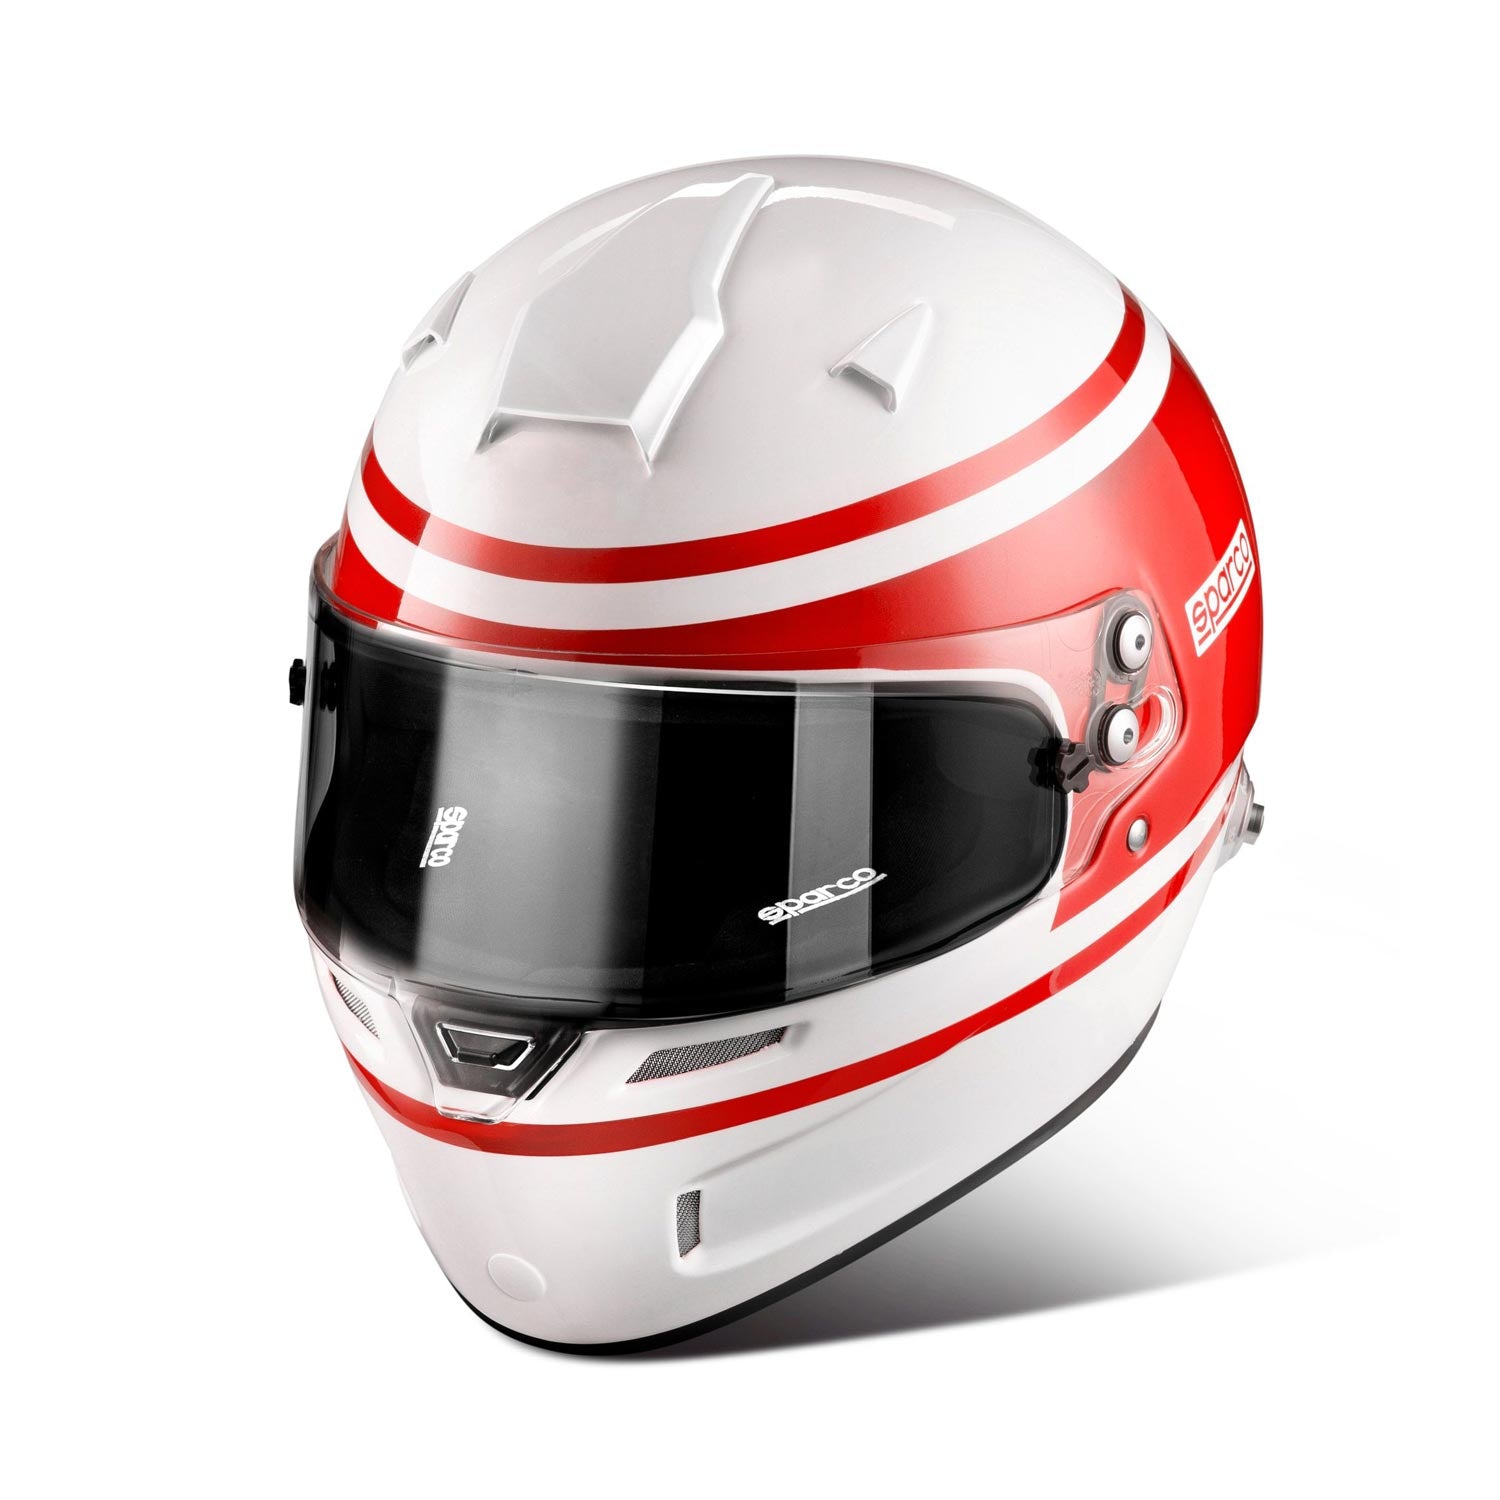 SPARCO 003375RS2M RF-5W 1977 Racing helmet full face, FIA/SNELL SA2020, red/white, size M (57-58) Photo-0 